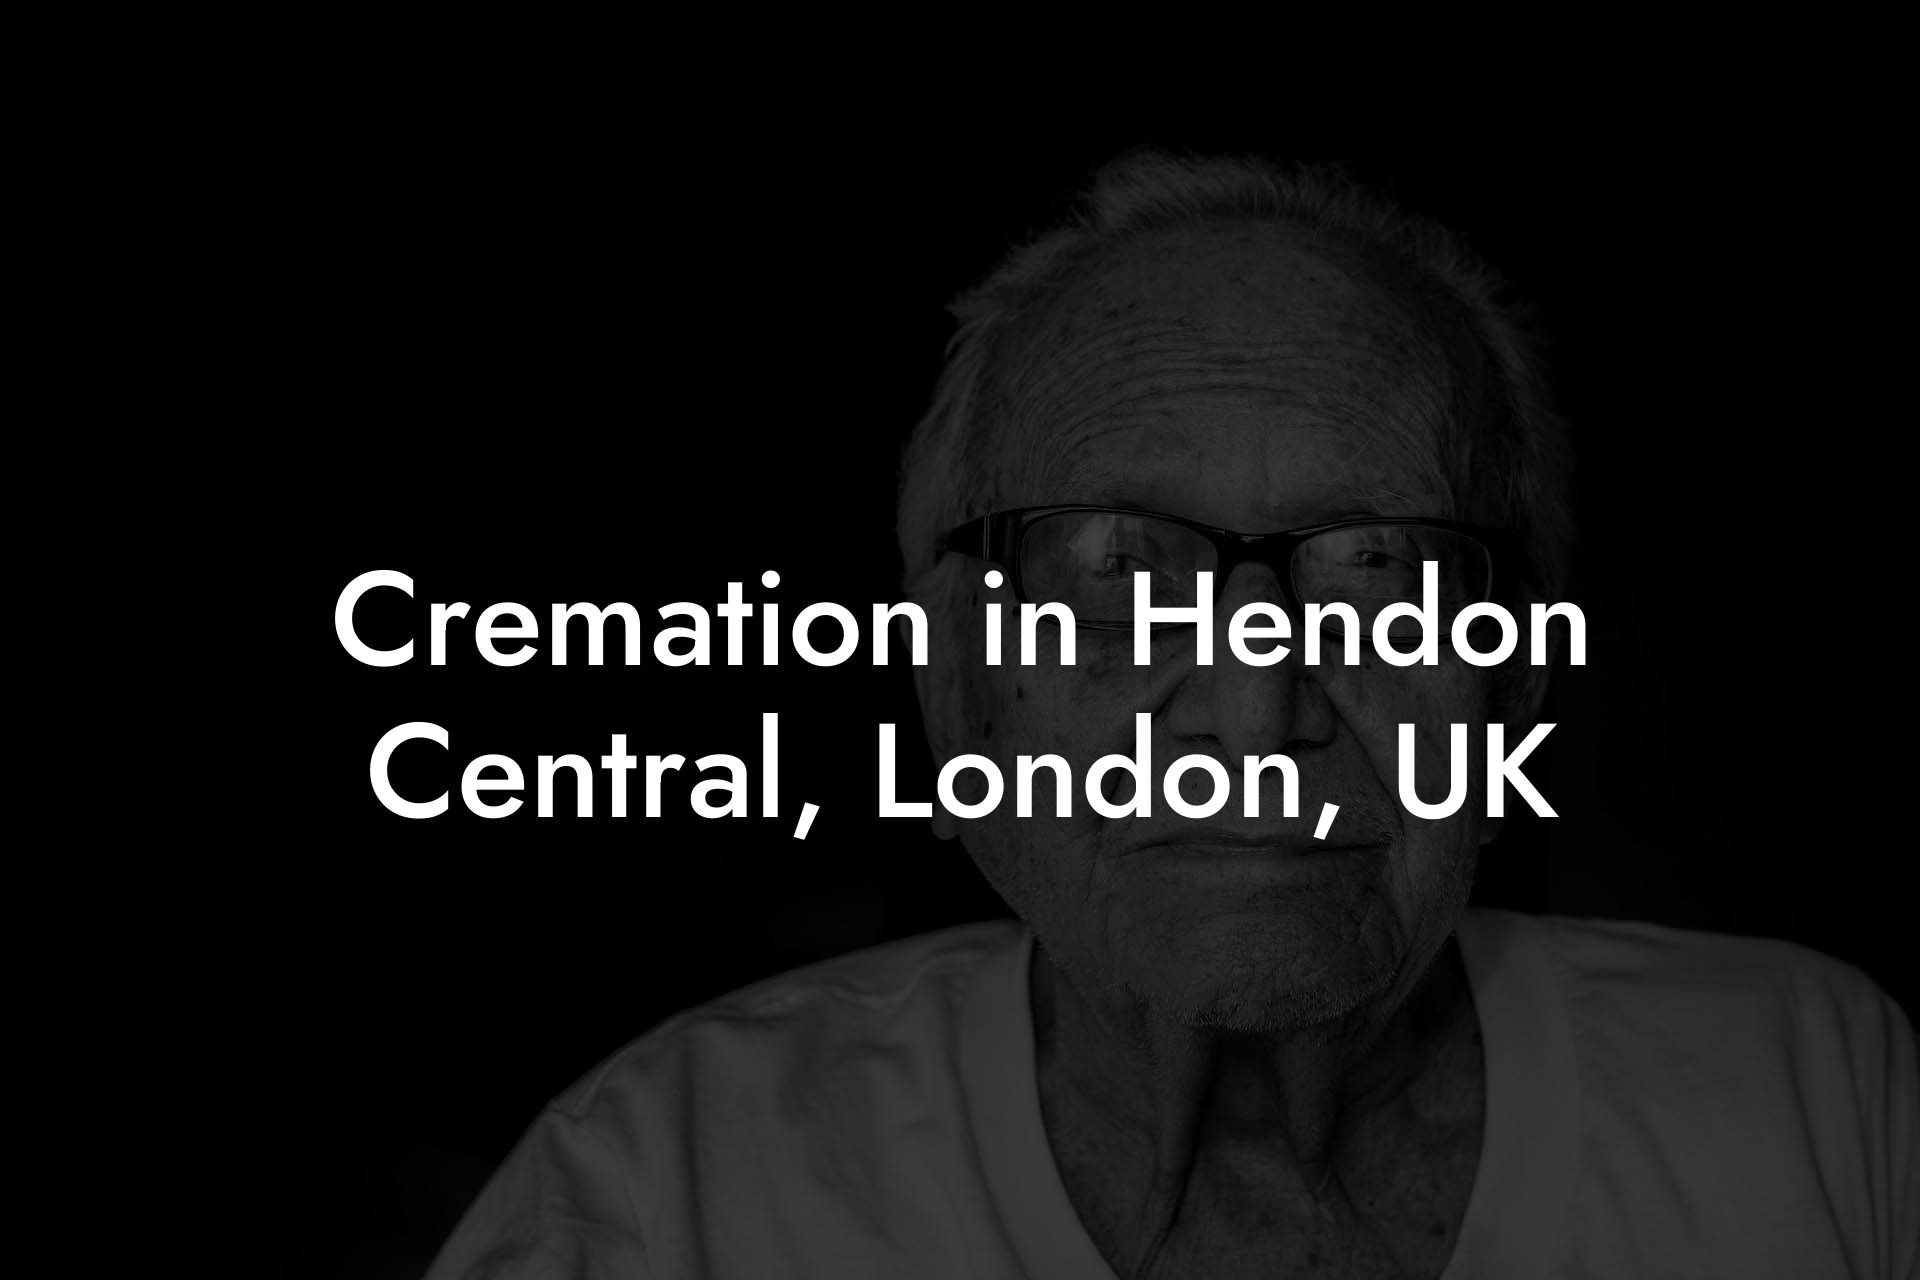 Cremation in Hendon Central, London, UK